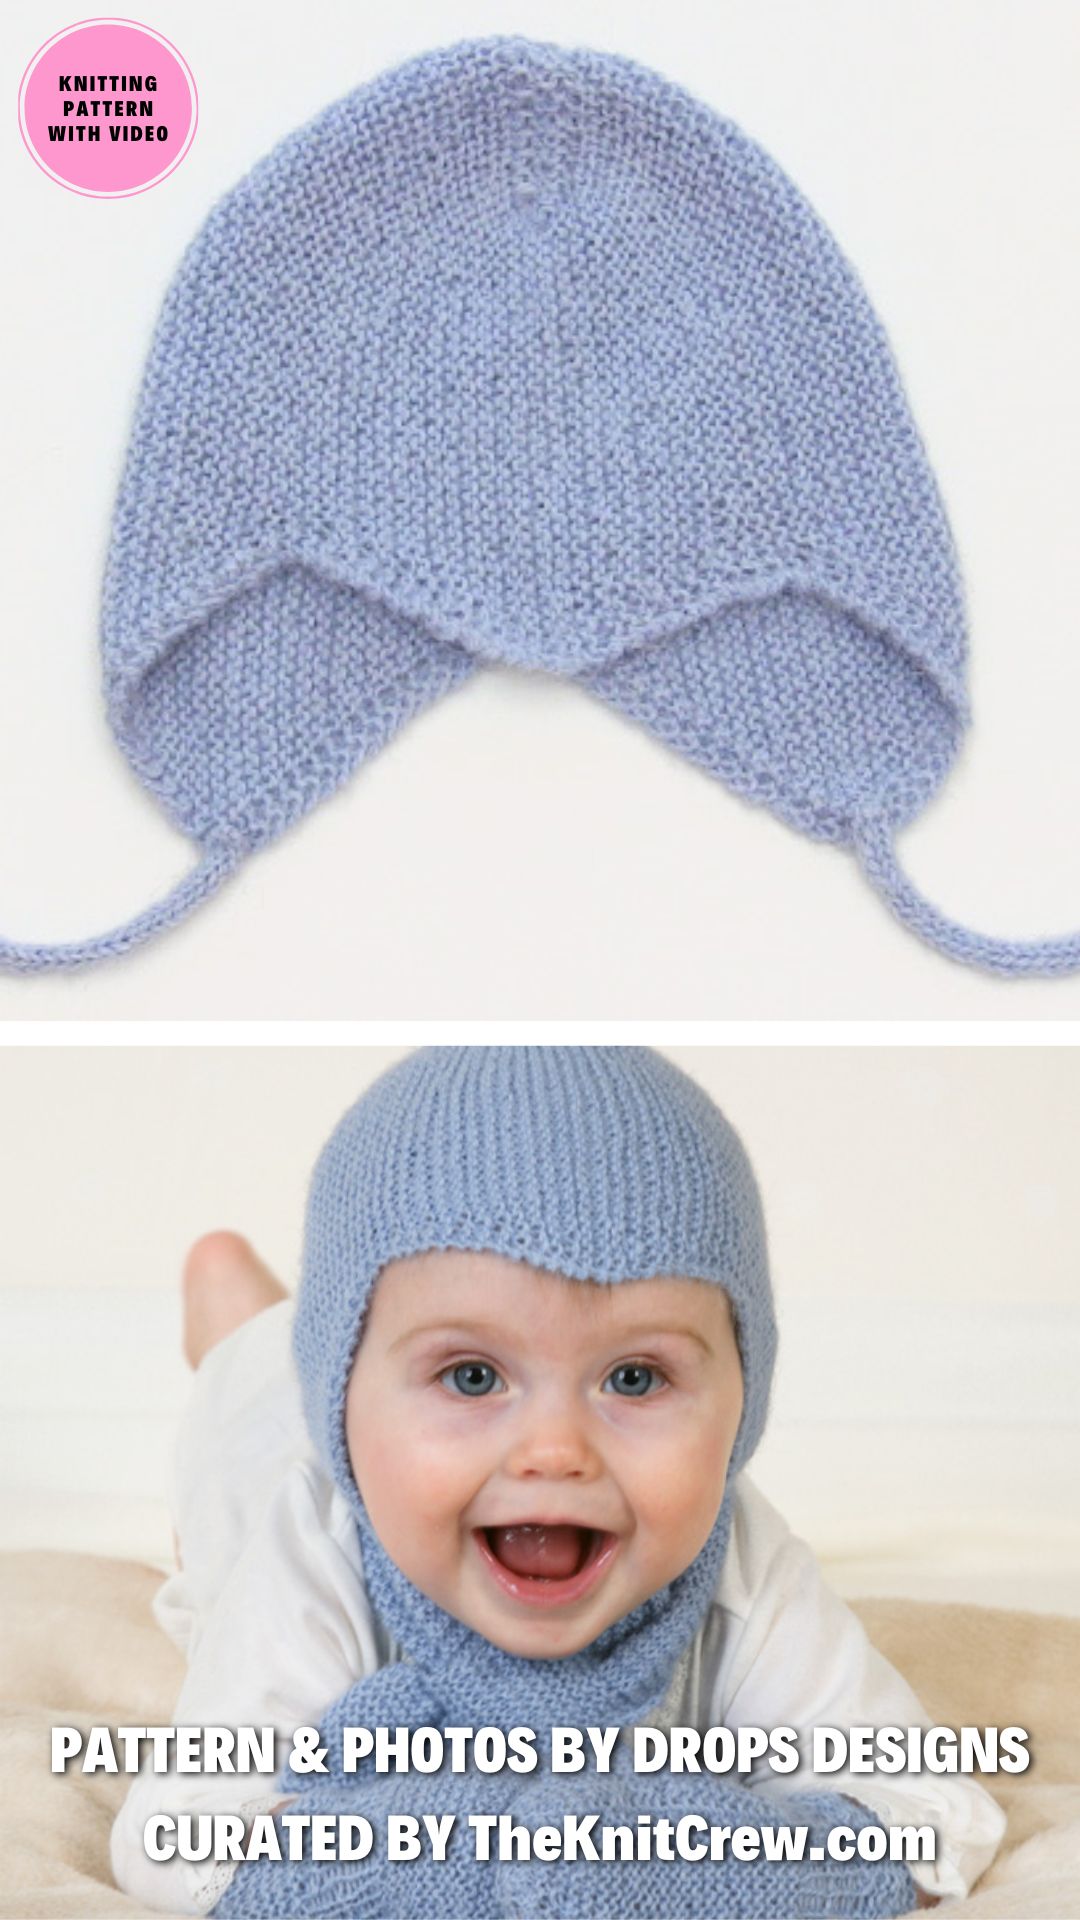 12 Cozy Knitted Aviator Hats Patterns For Your Little Ones - The Knit Crew